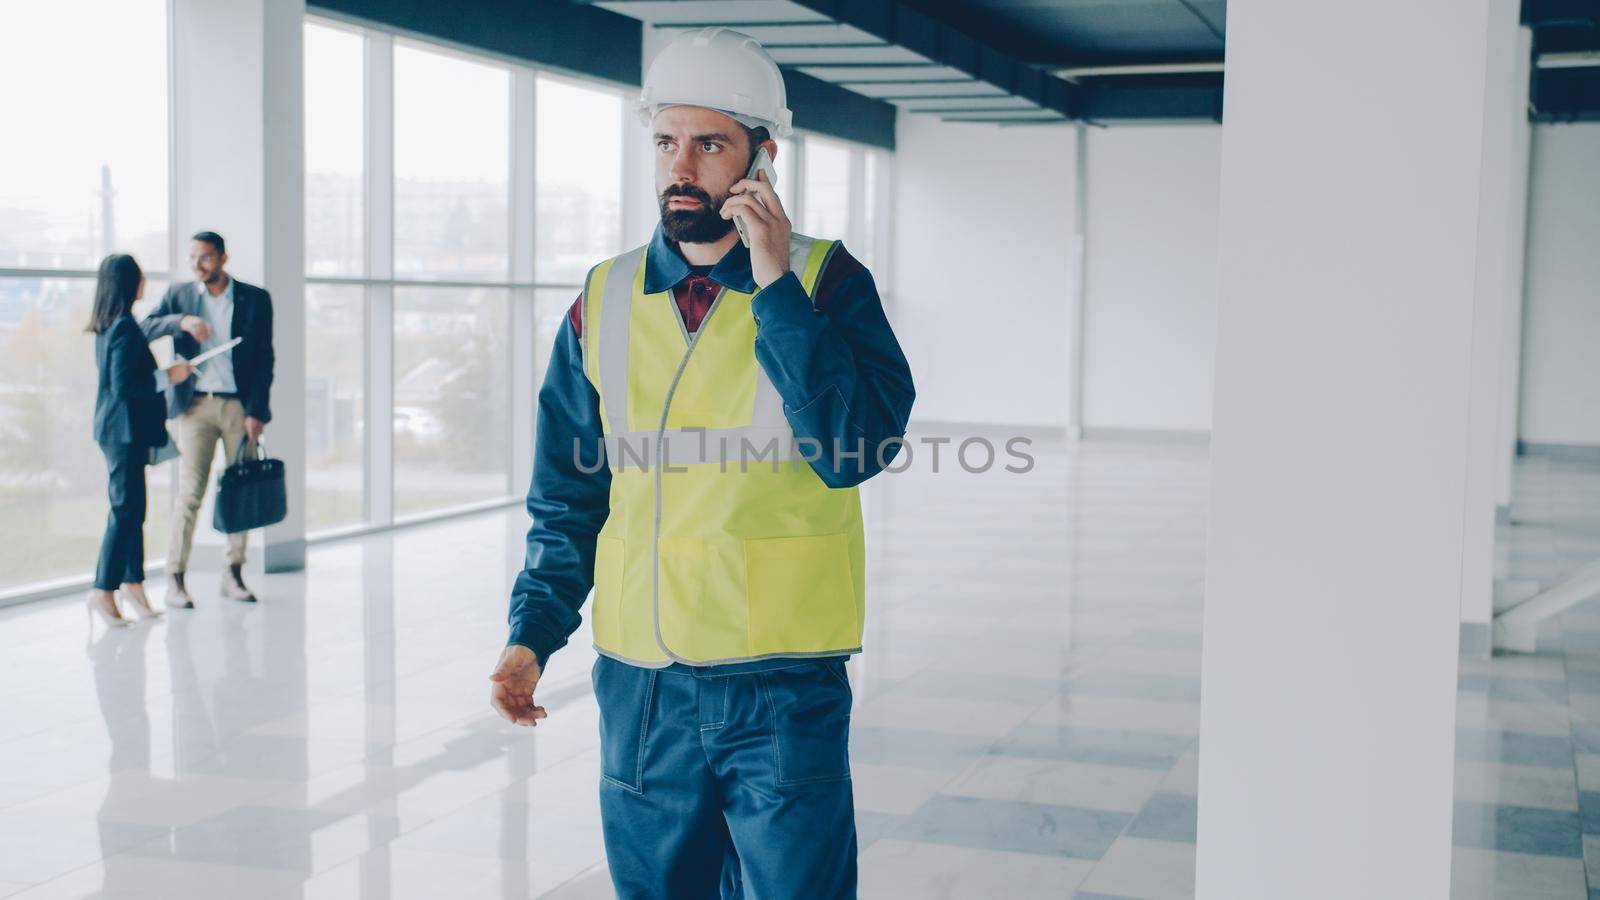 portrait of engineer wearing helmet and vest speaking on mobile phone in new building walking in empty hall concentrated on conversation